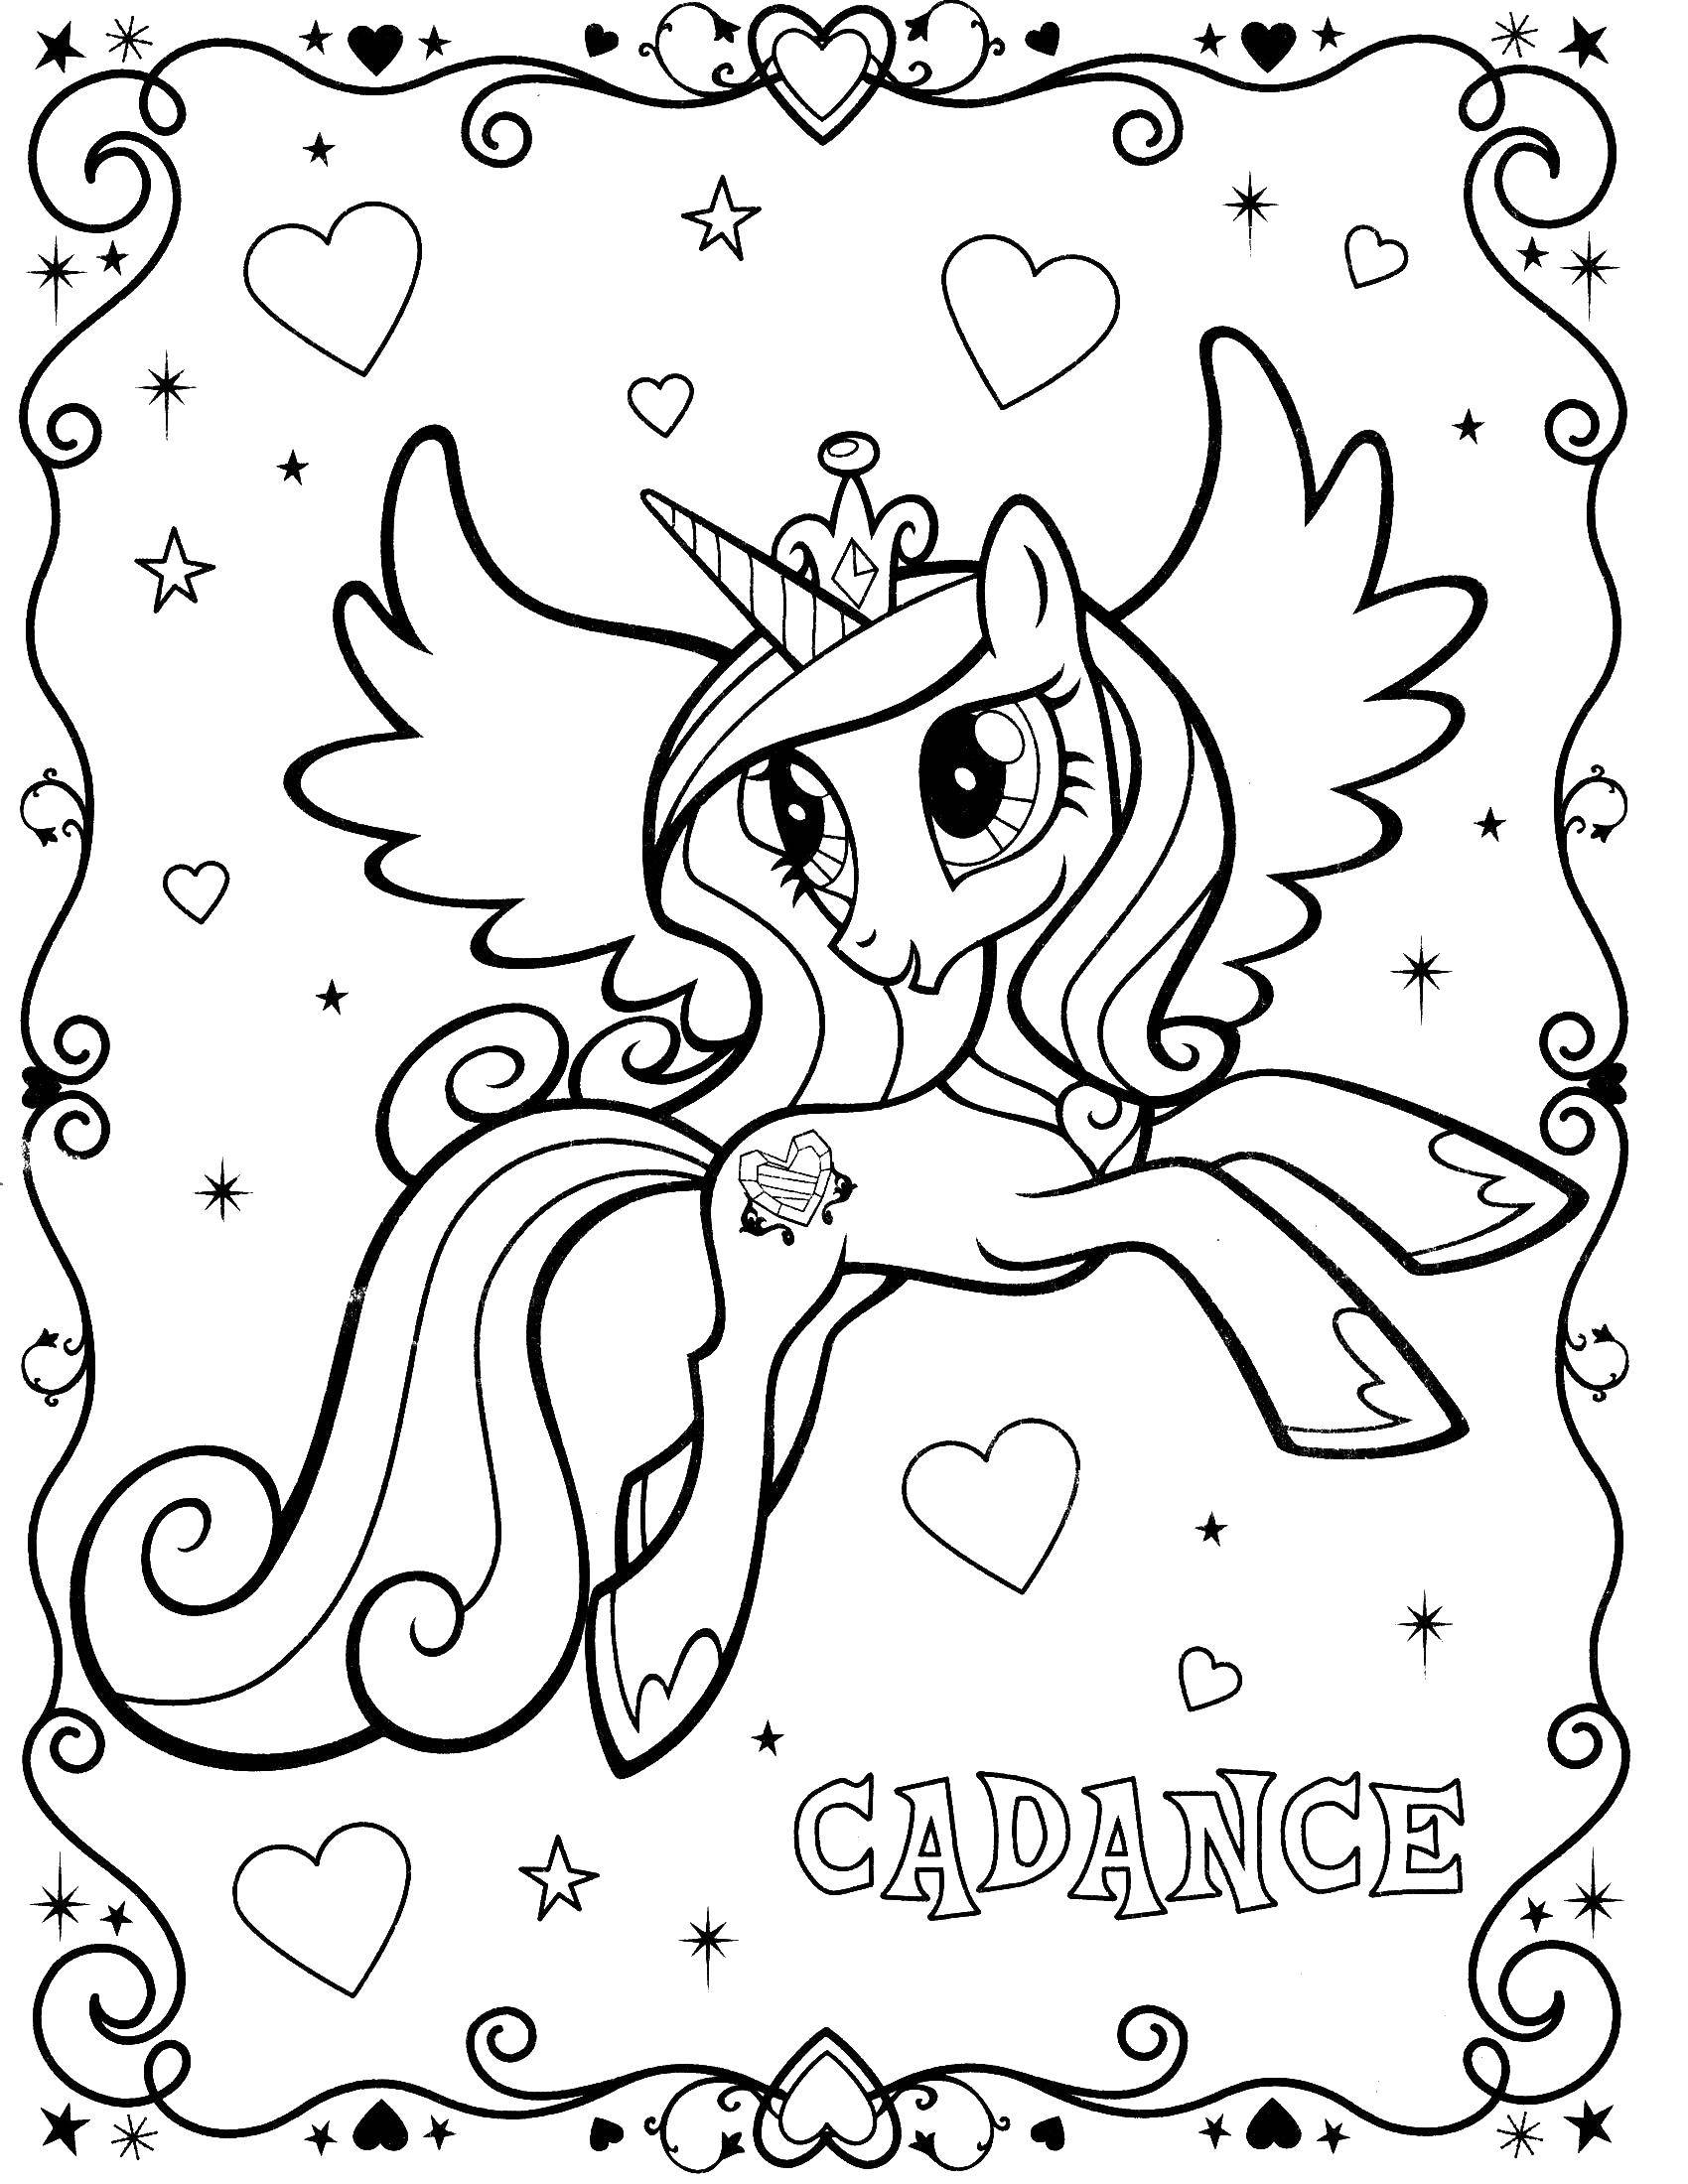 Coloring Cadens. Category my little pony. Tags:  Pony, My little pony .